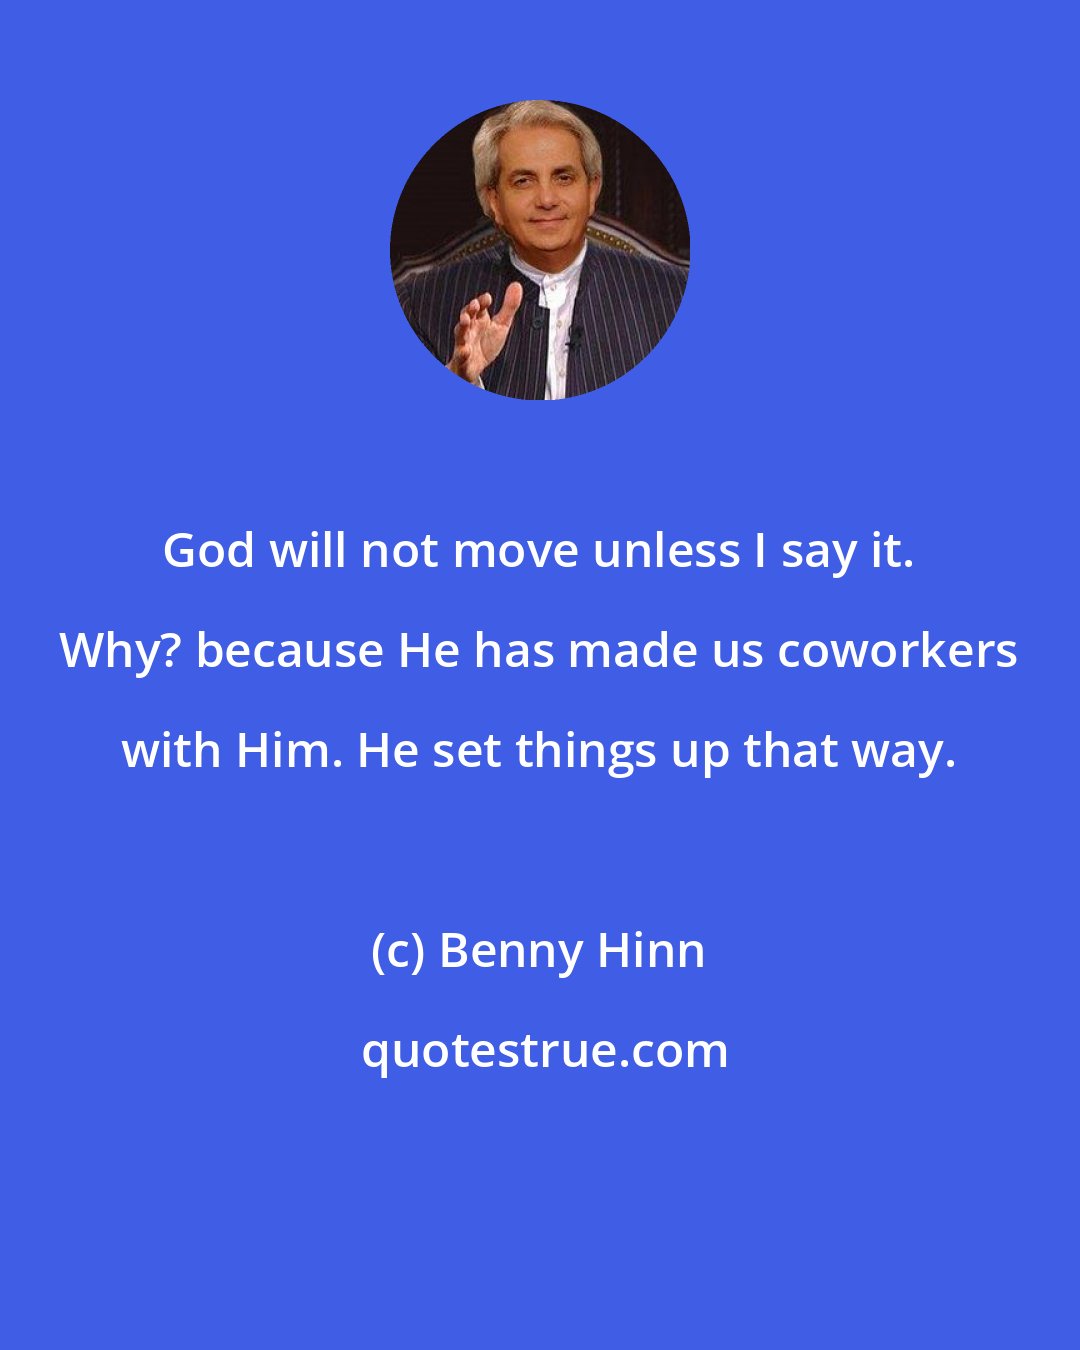 Benny Hinn: God will not move unless I say it. Why? because He has made us coworkers with Him. He set things up that way.